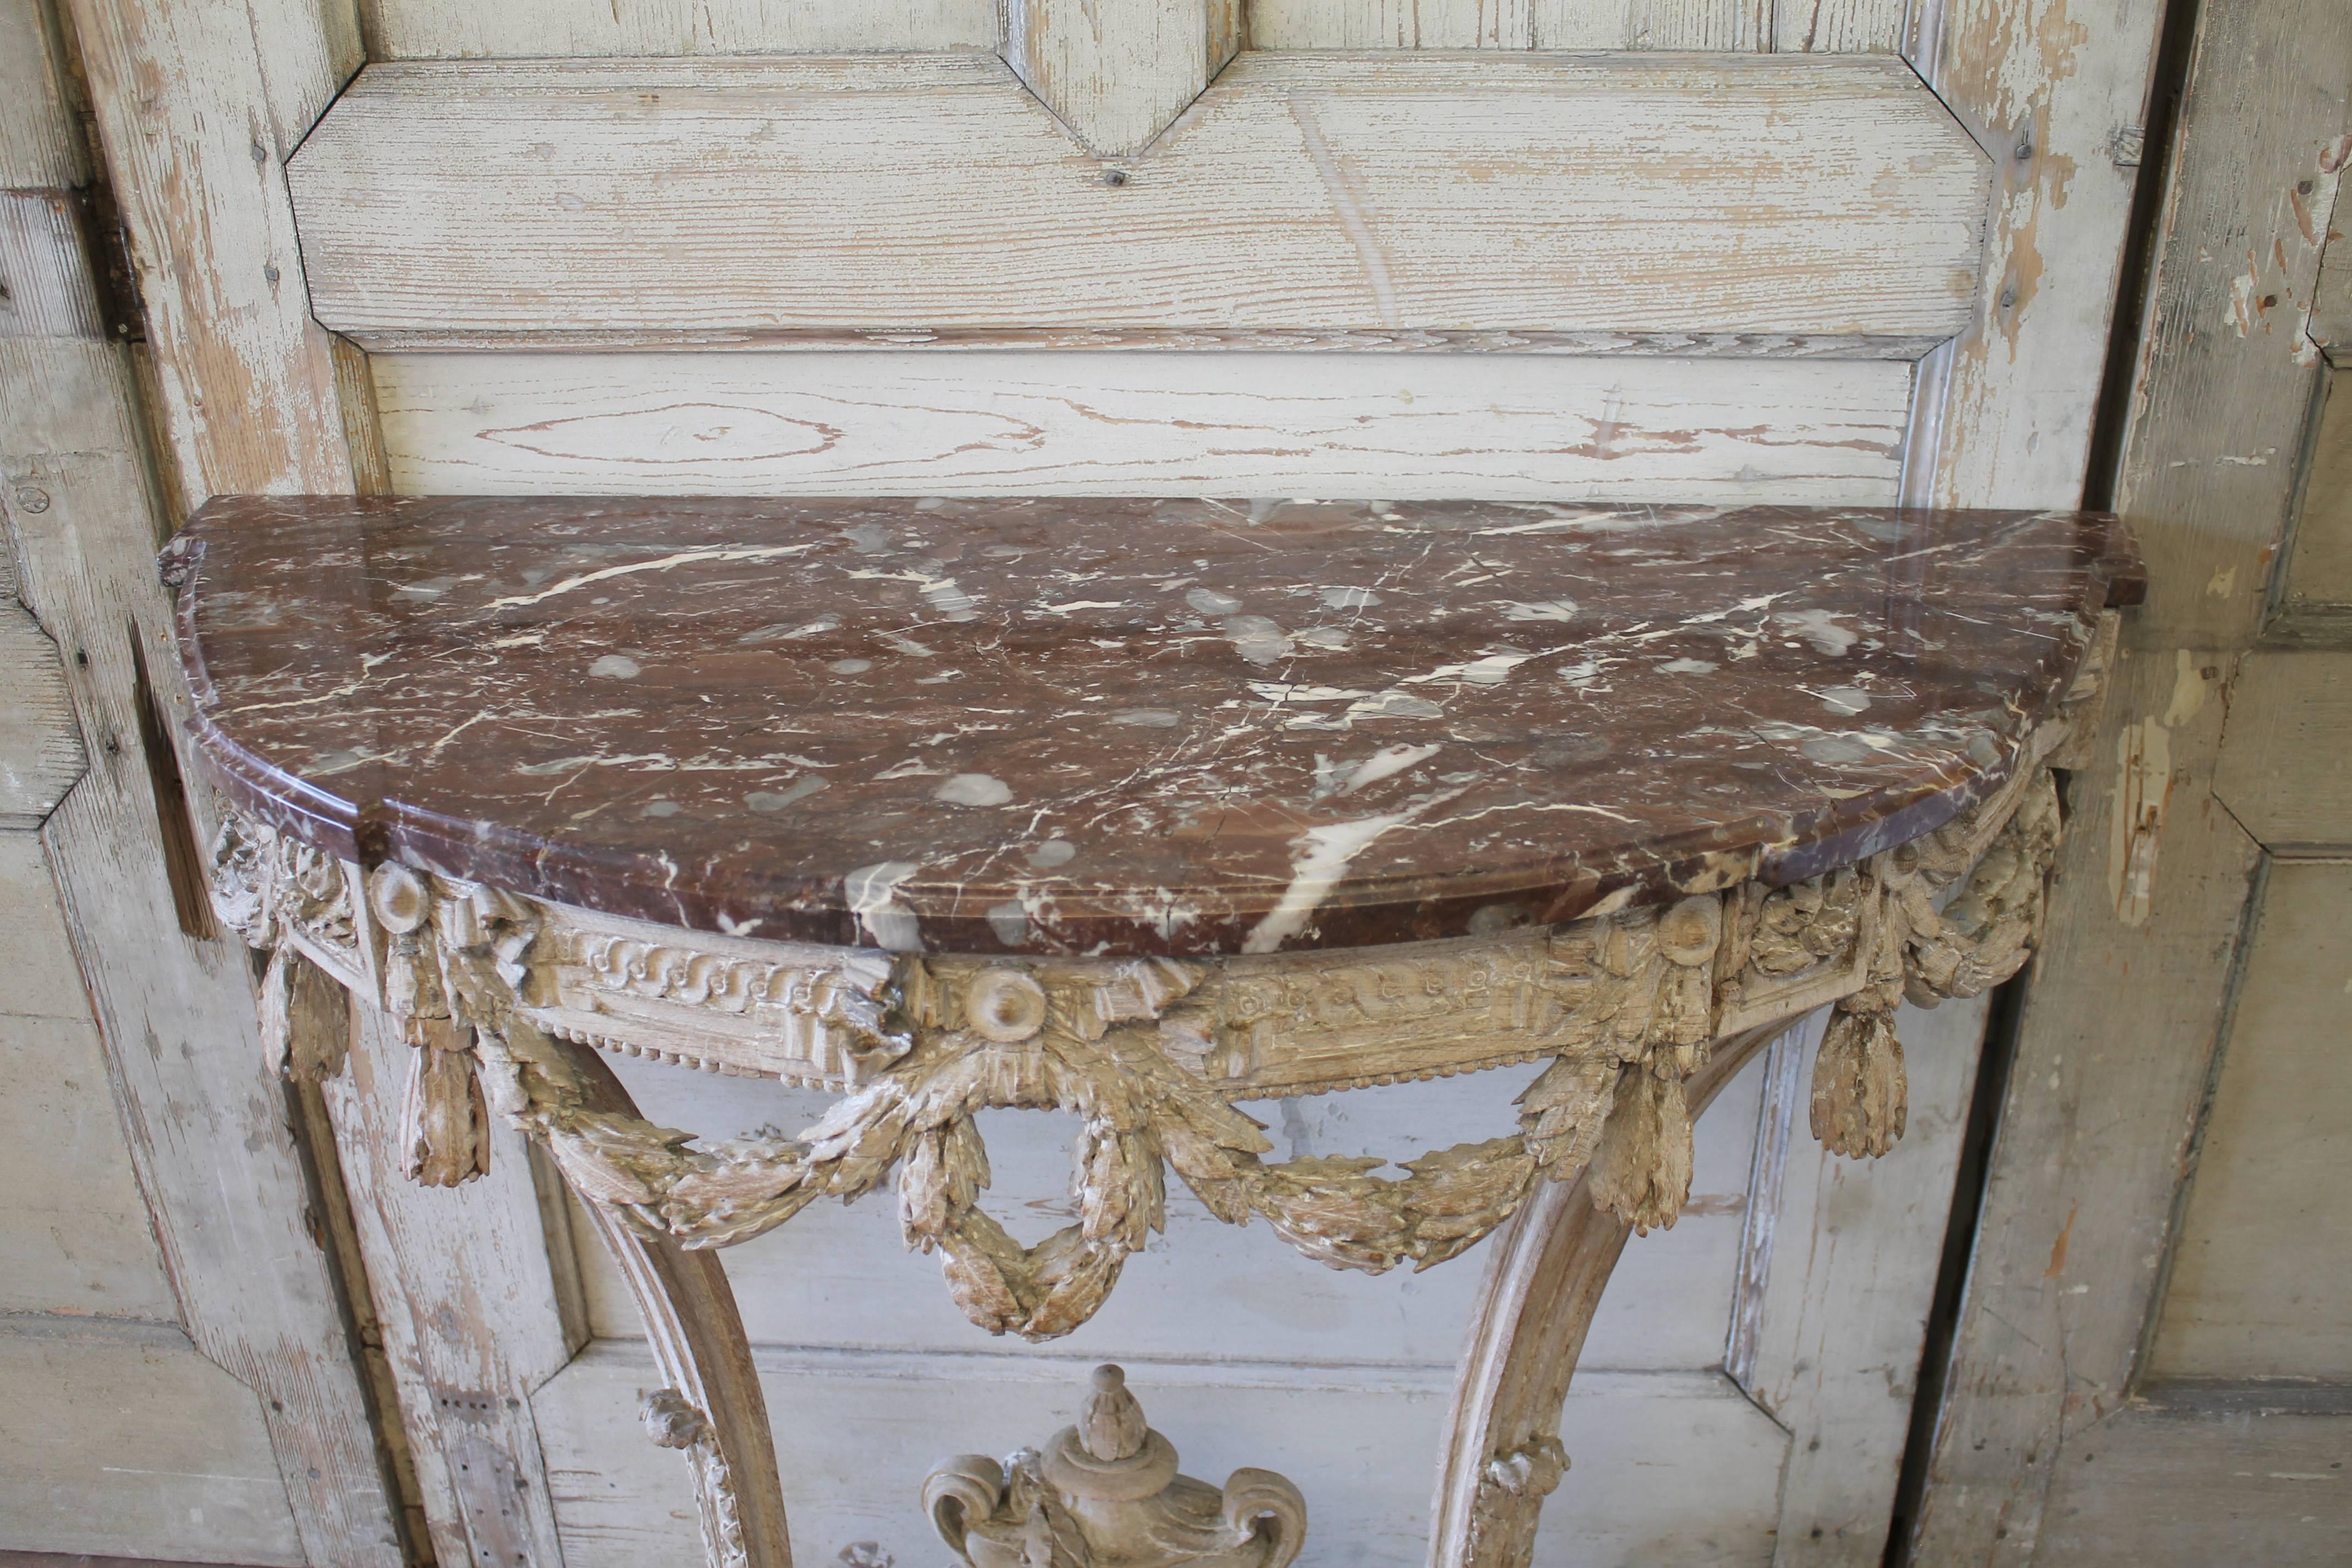 Lovely hand-carved oak console table with marble top. A carved leaf swag decoration surrounds the sides and front. A large carved urn with trailing laurel leaf vine wraps around and over the top of the urn. Console is ready to be attached to the